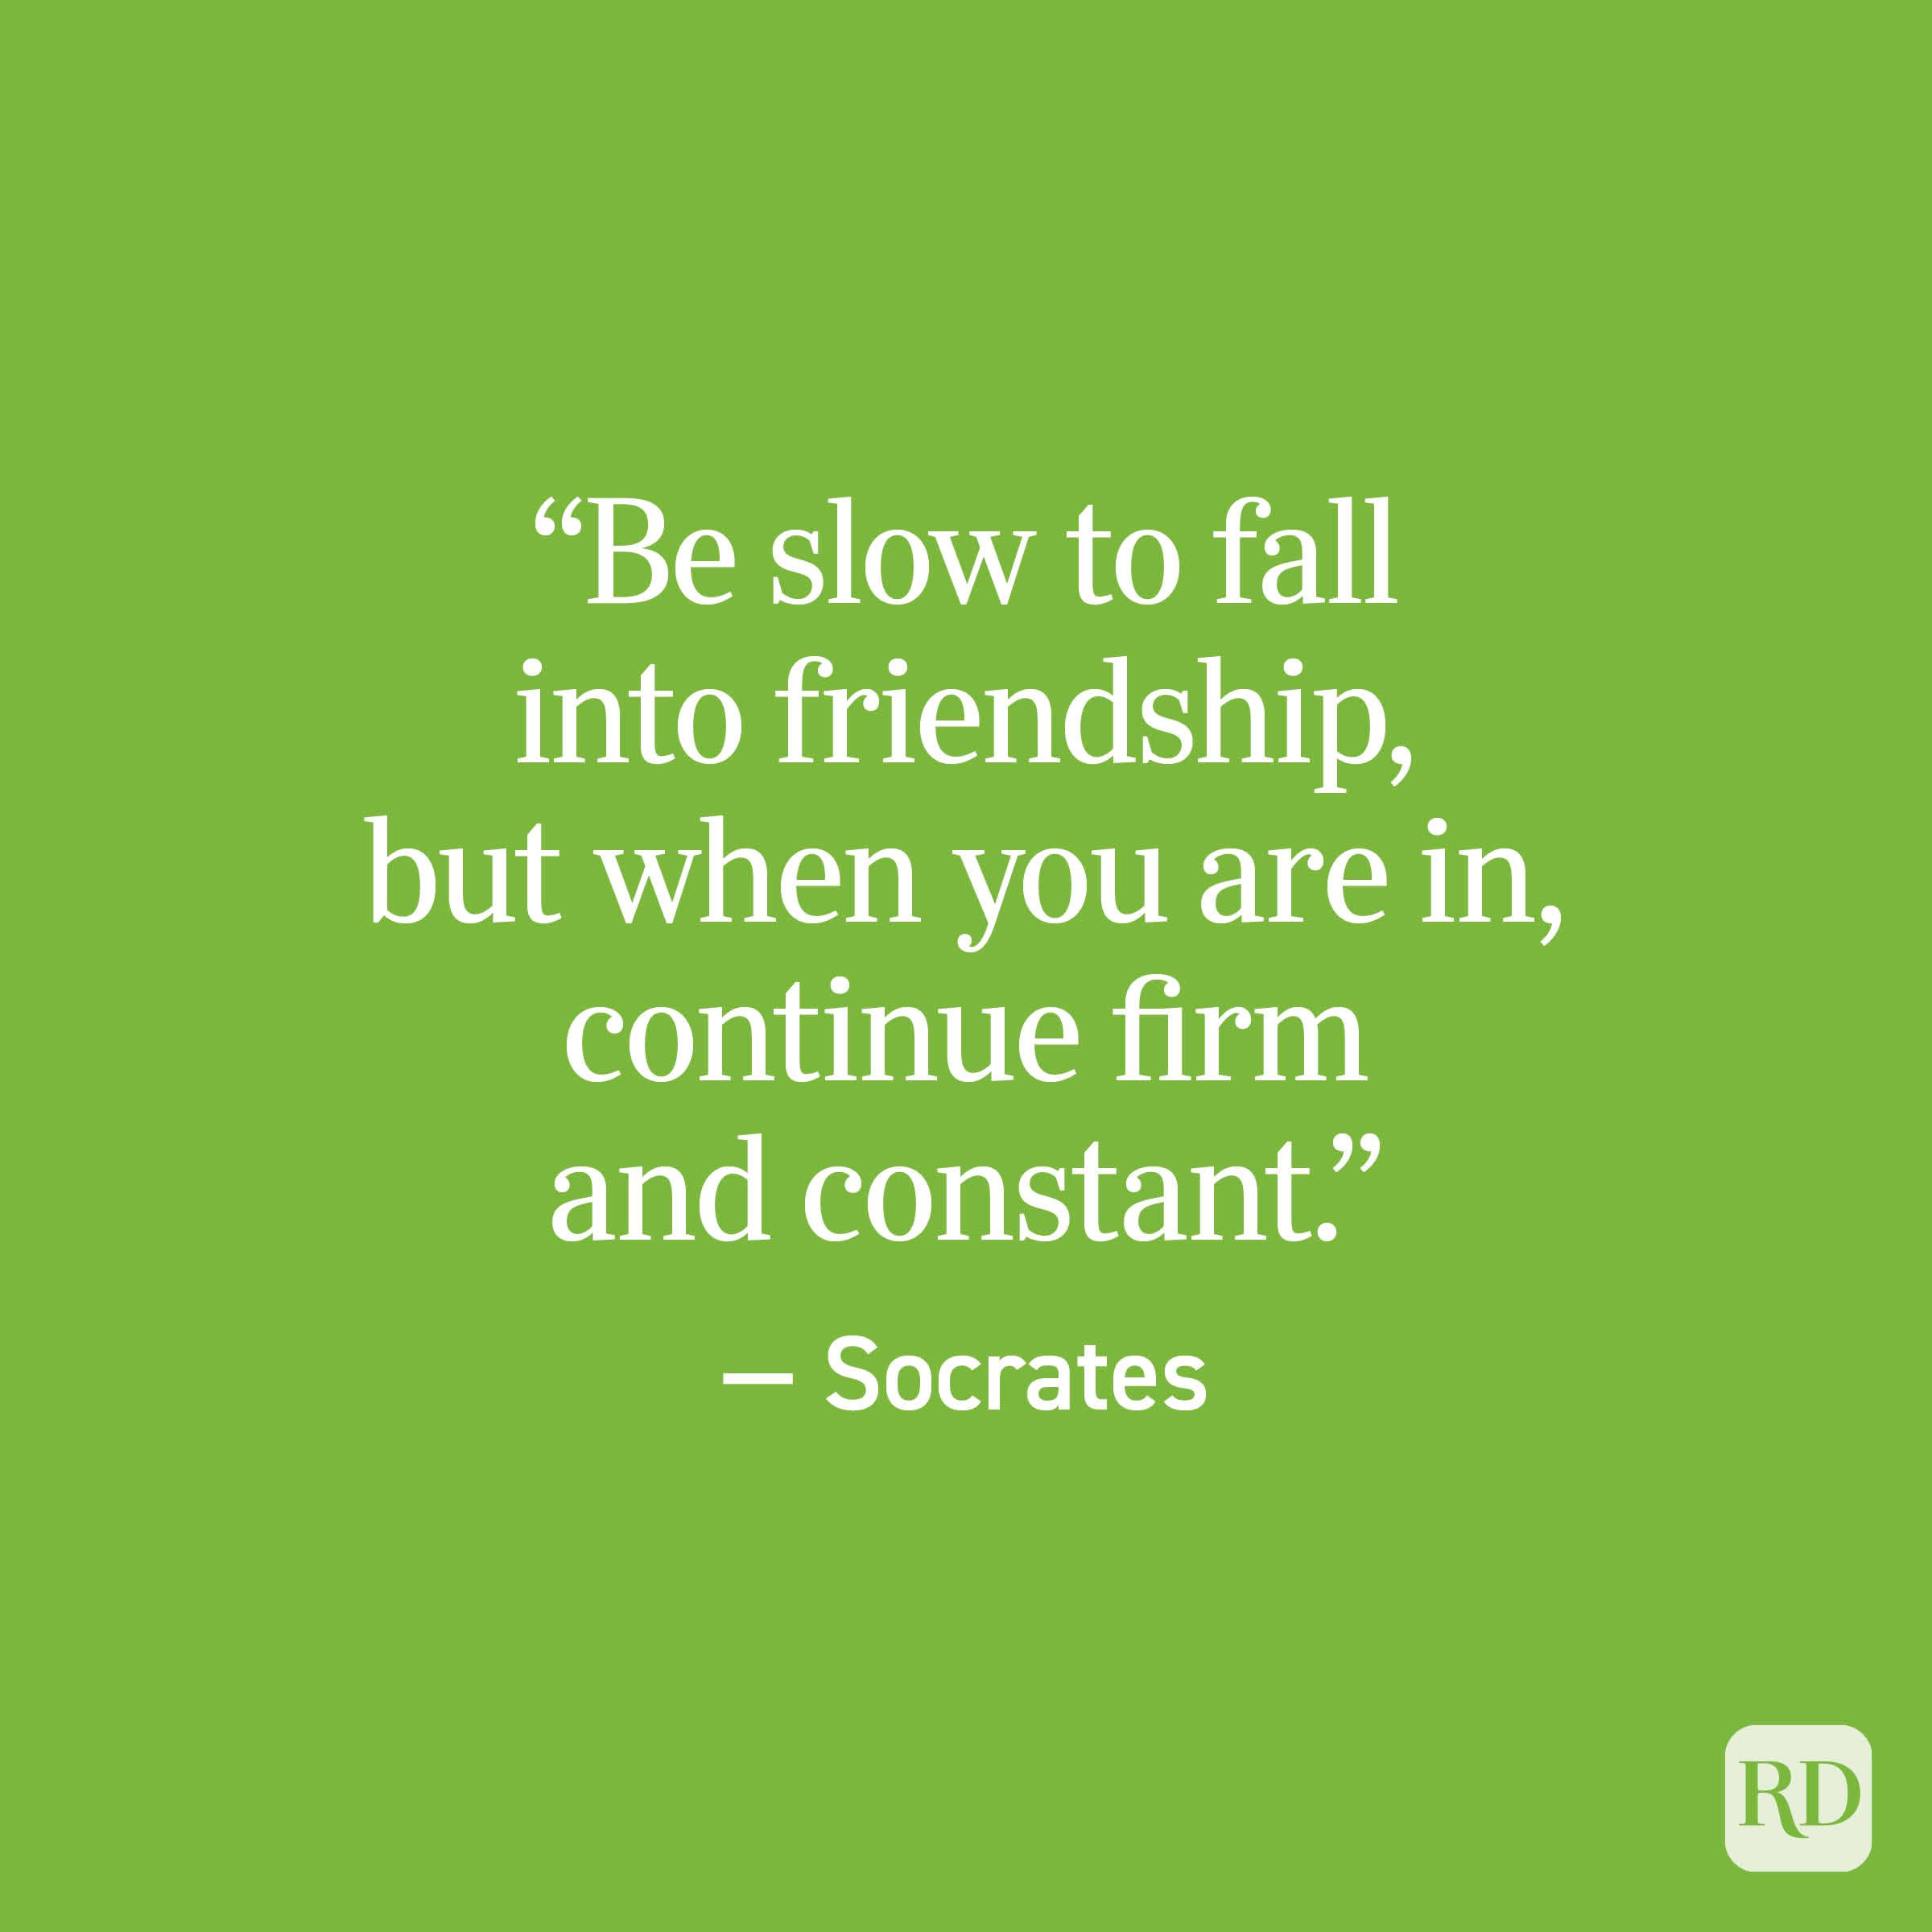 “Be slow to fall into friendship, but when you are in, continue firm and constant.” — Socrates